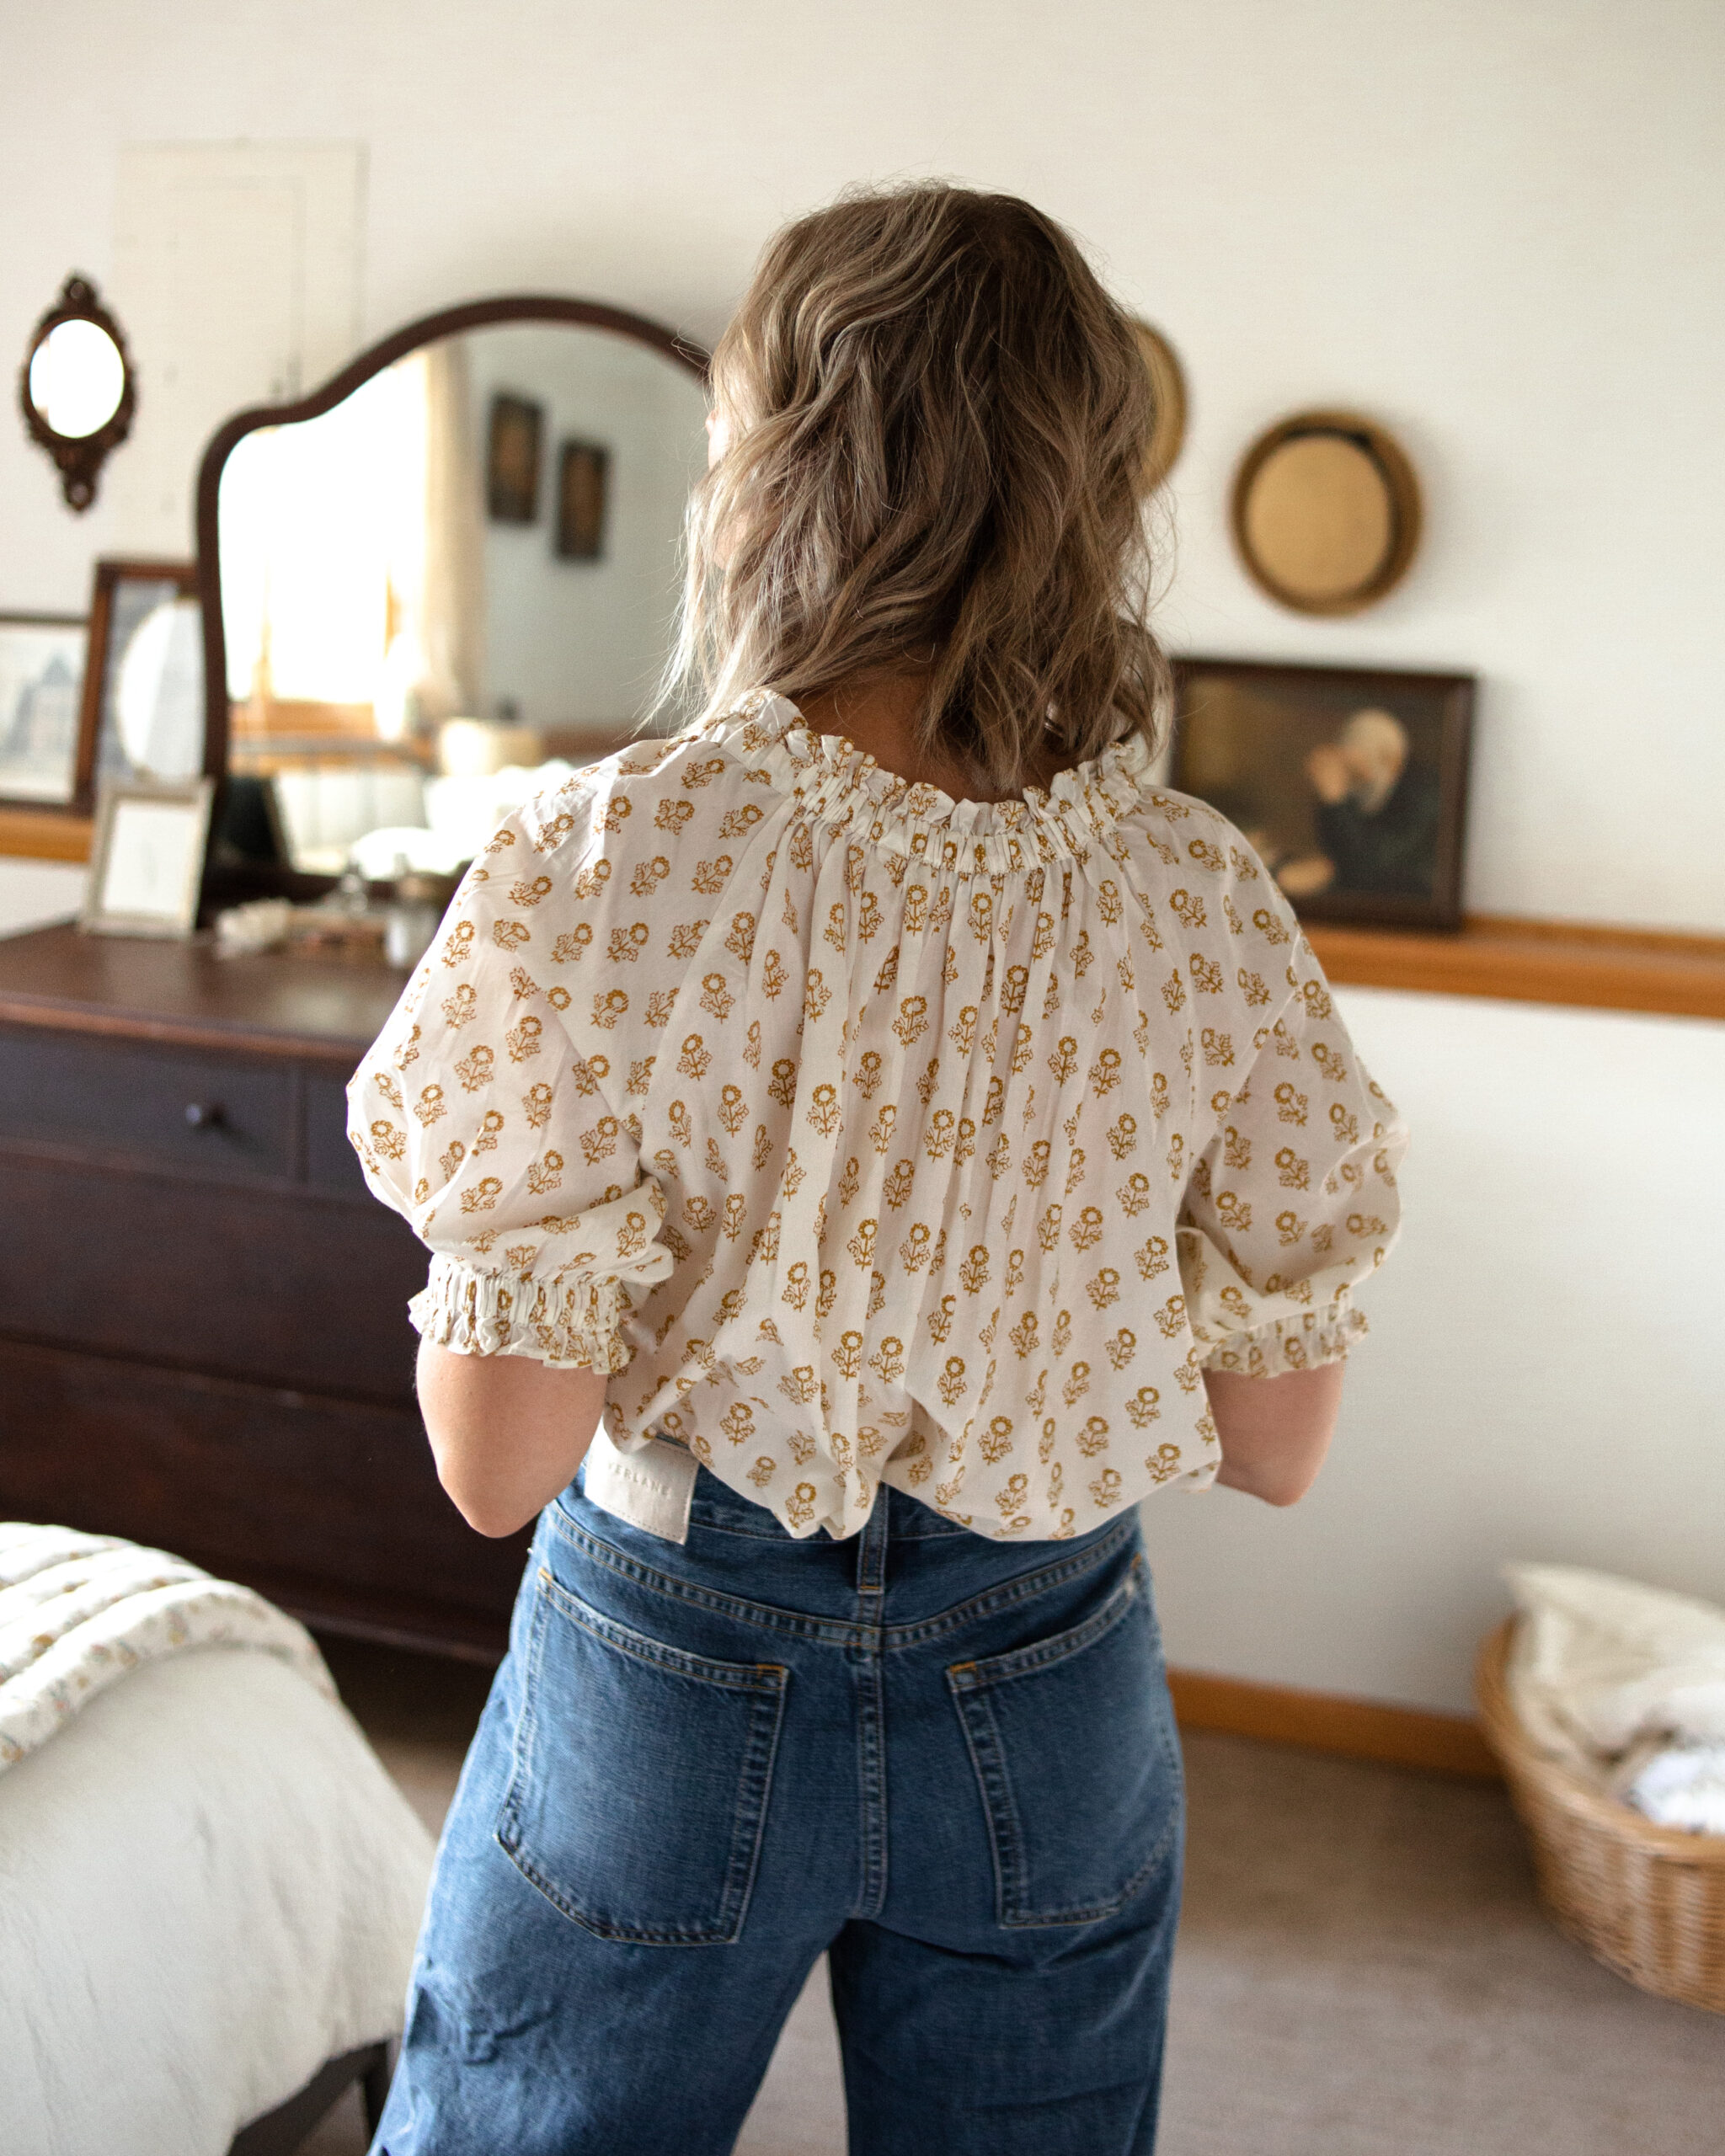 Karin Emily is wearing the Baggy Jean from Everlane with a Doen floral blouse